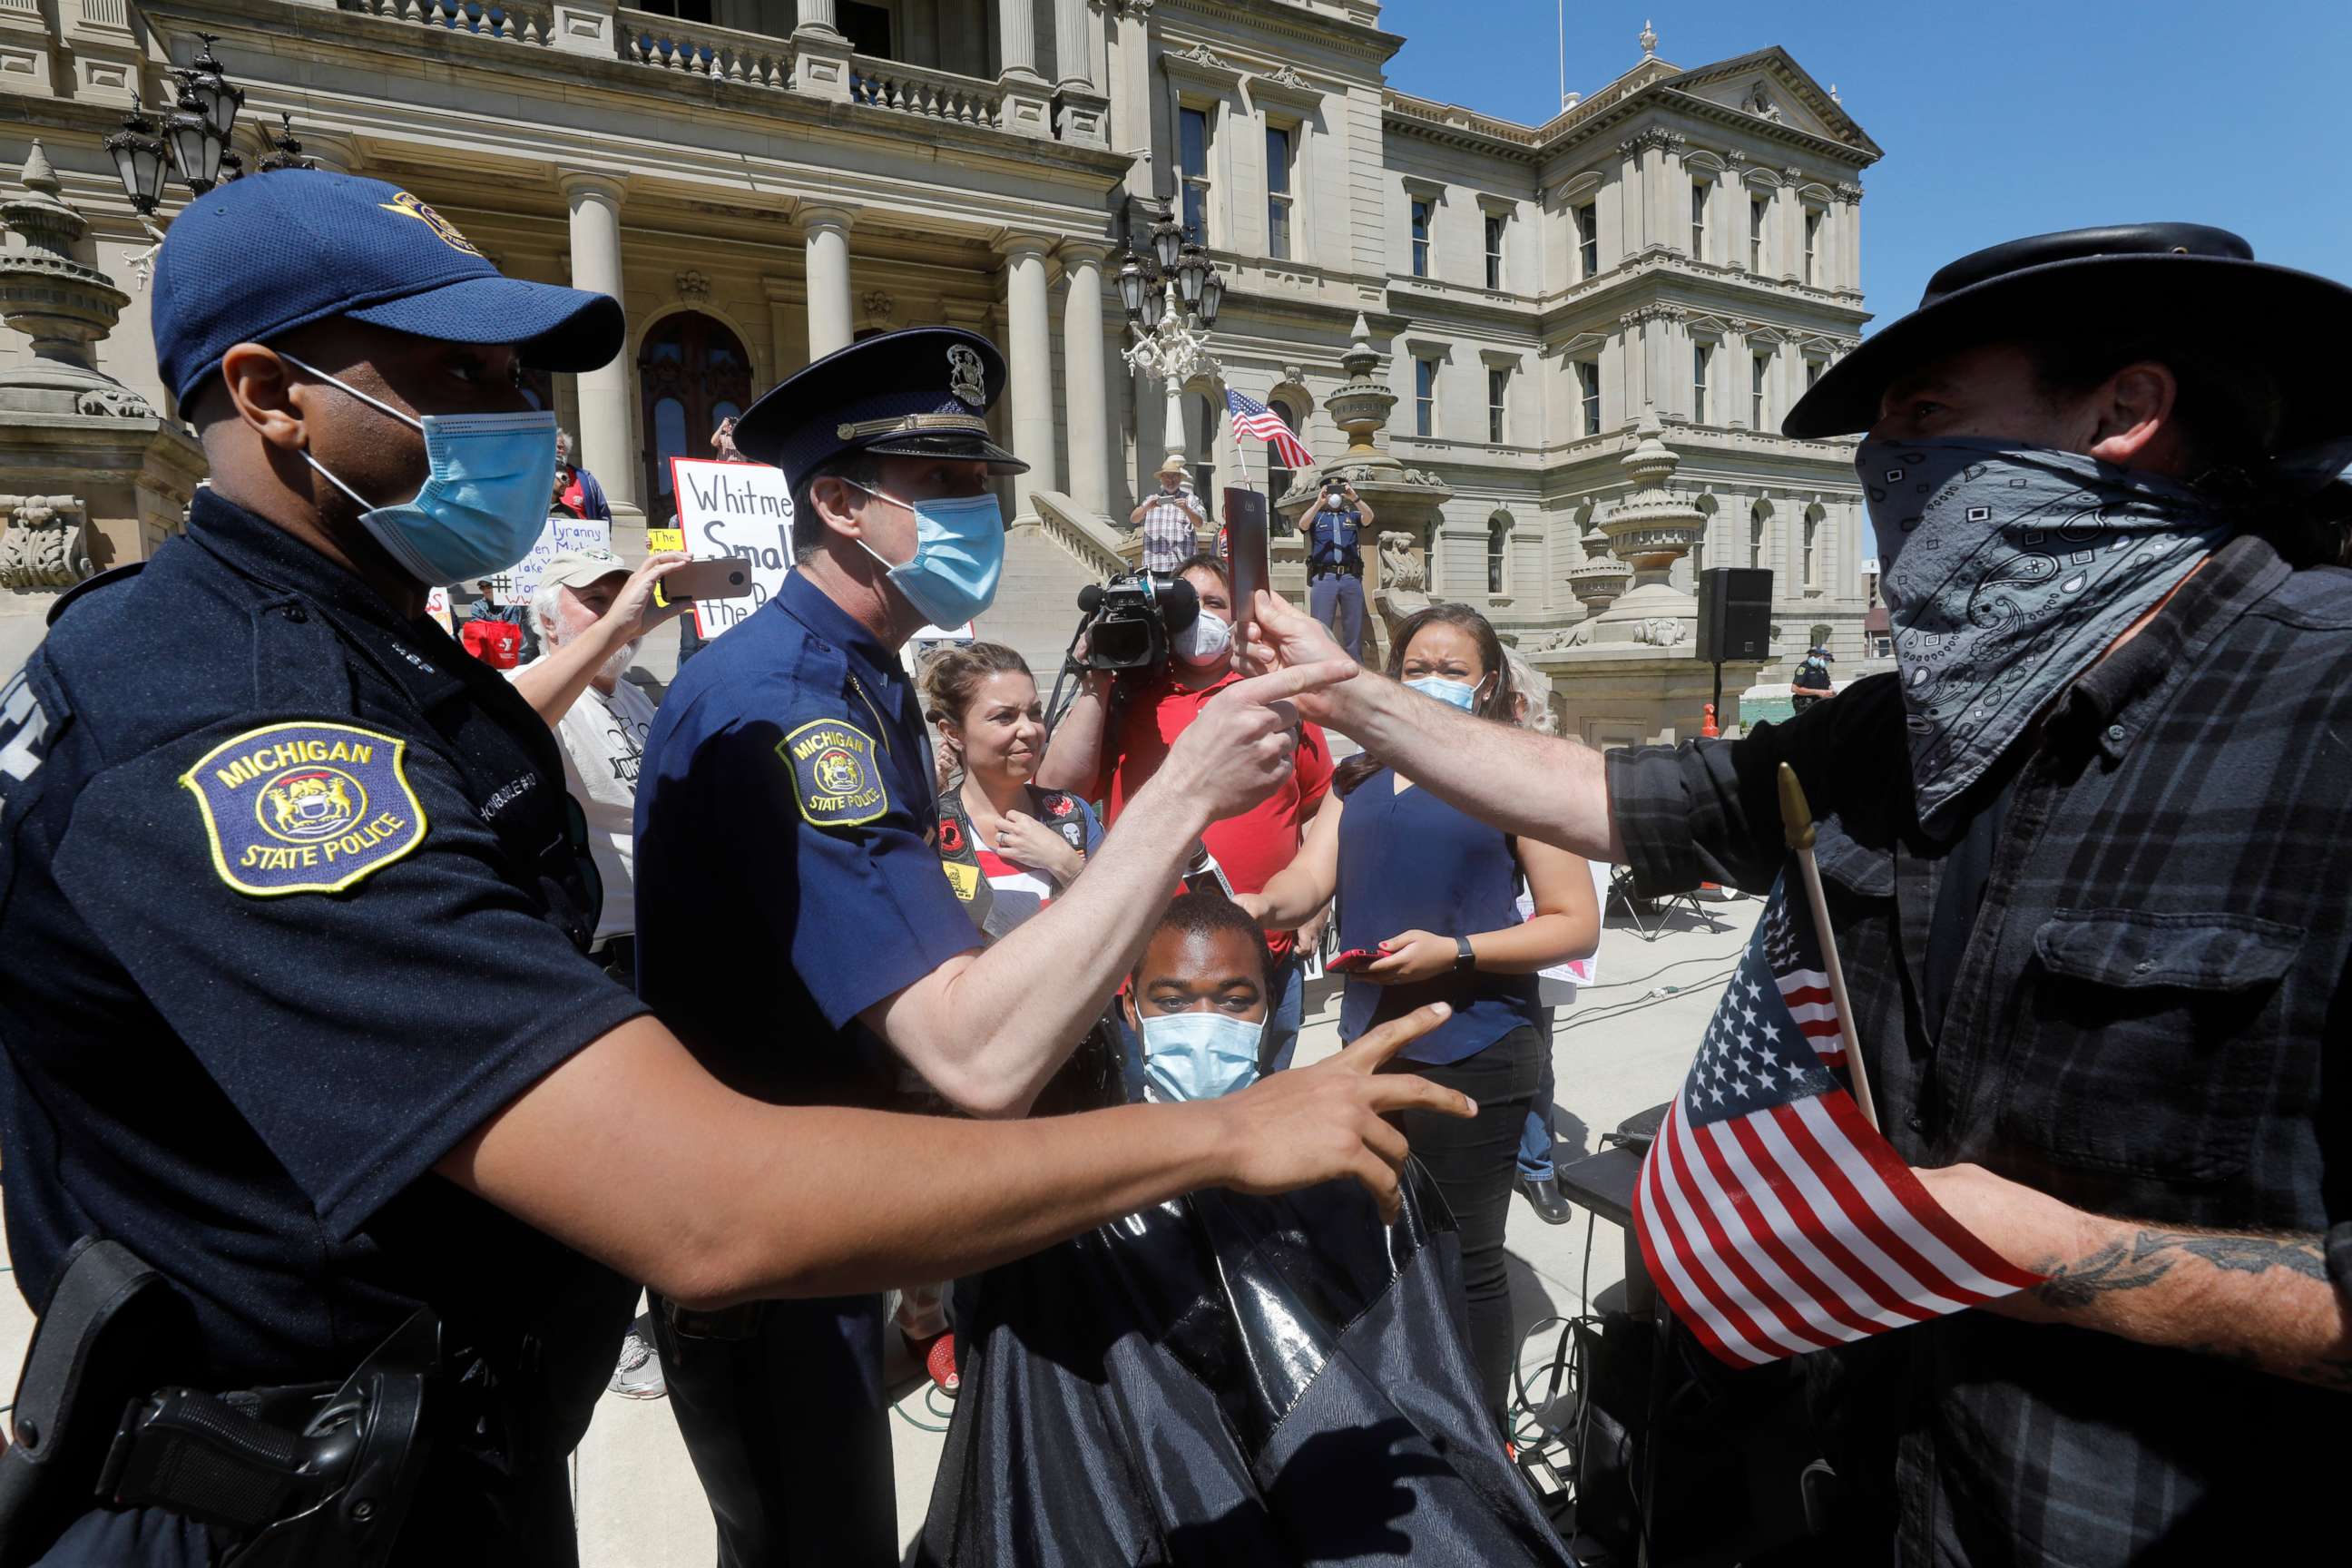 PHOTO: A person tries to help Angela Rigas as she gets a ticket for being a disorderly person as she cuts hair at the Michigan Conservative Coalition organized "Operation Haircut" outside the Michigan State Capitol in Lansing, Michigan on May 20, 2020.